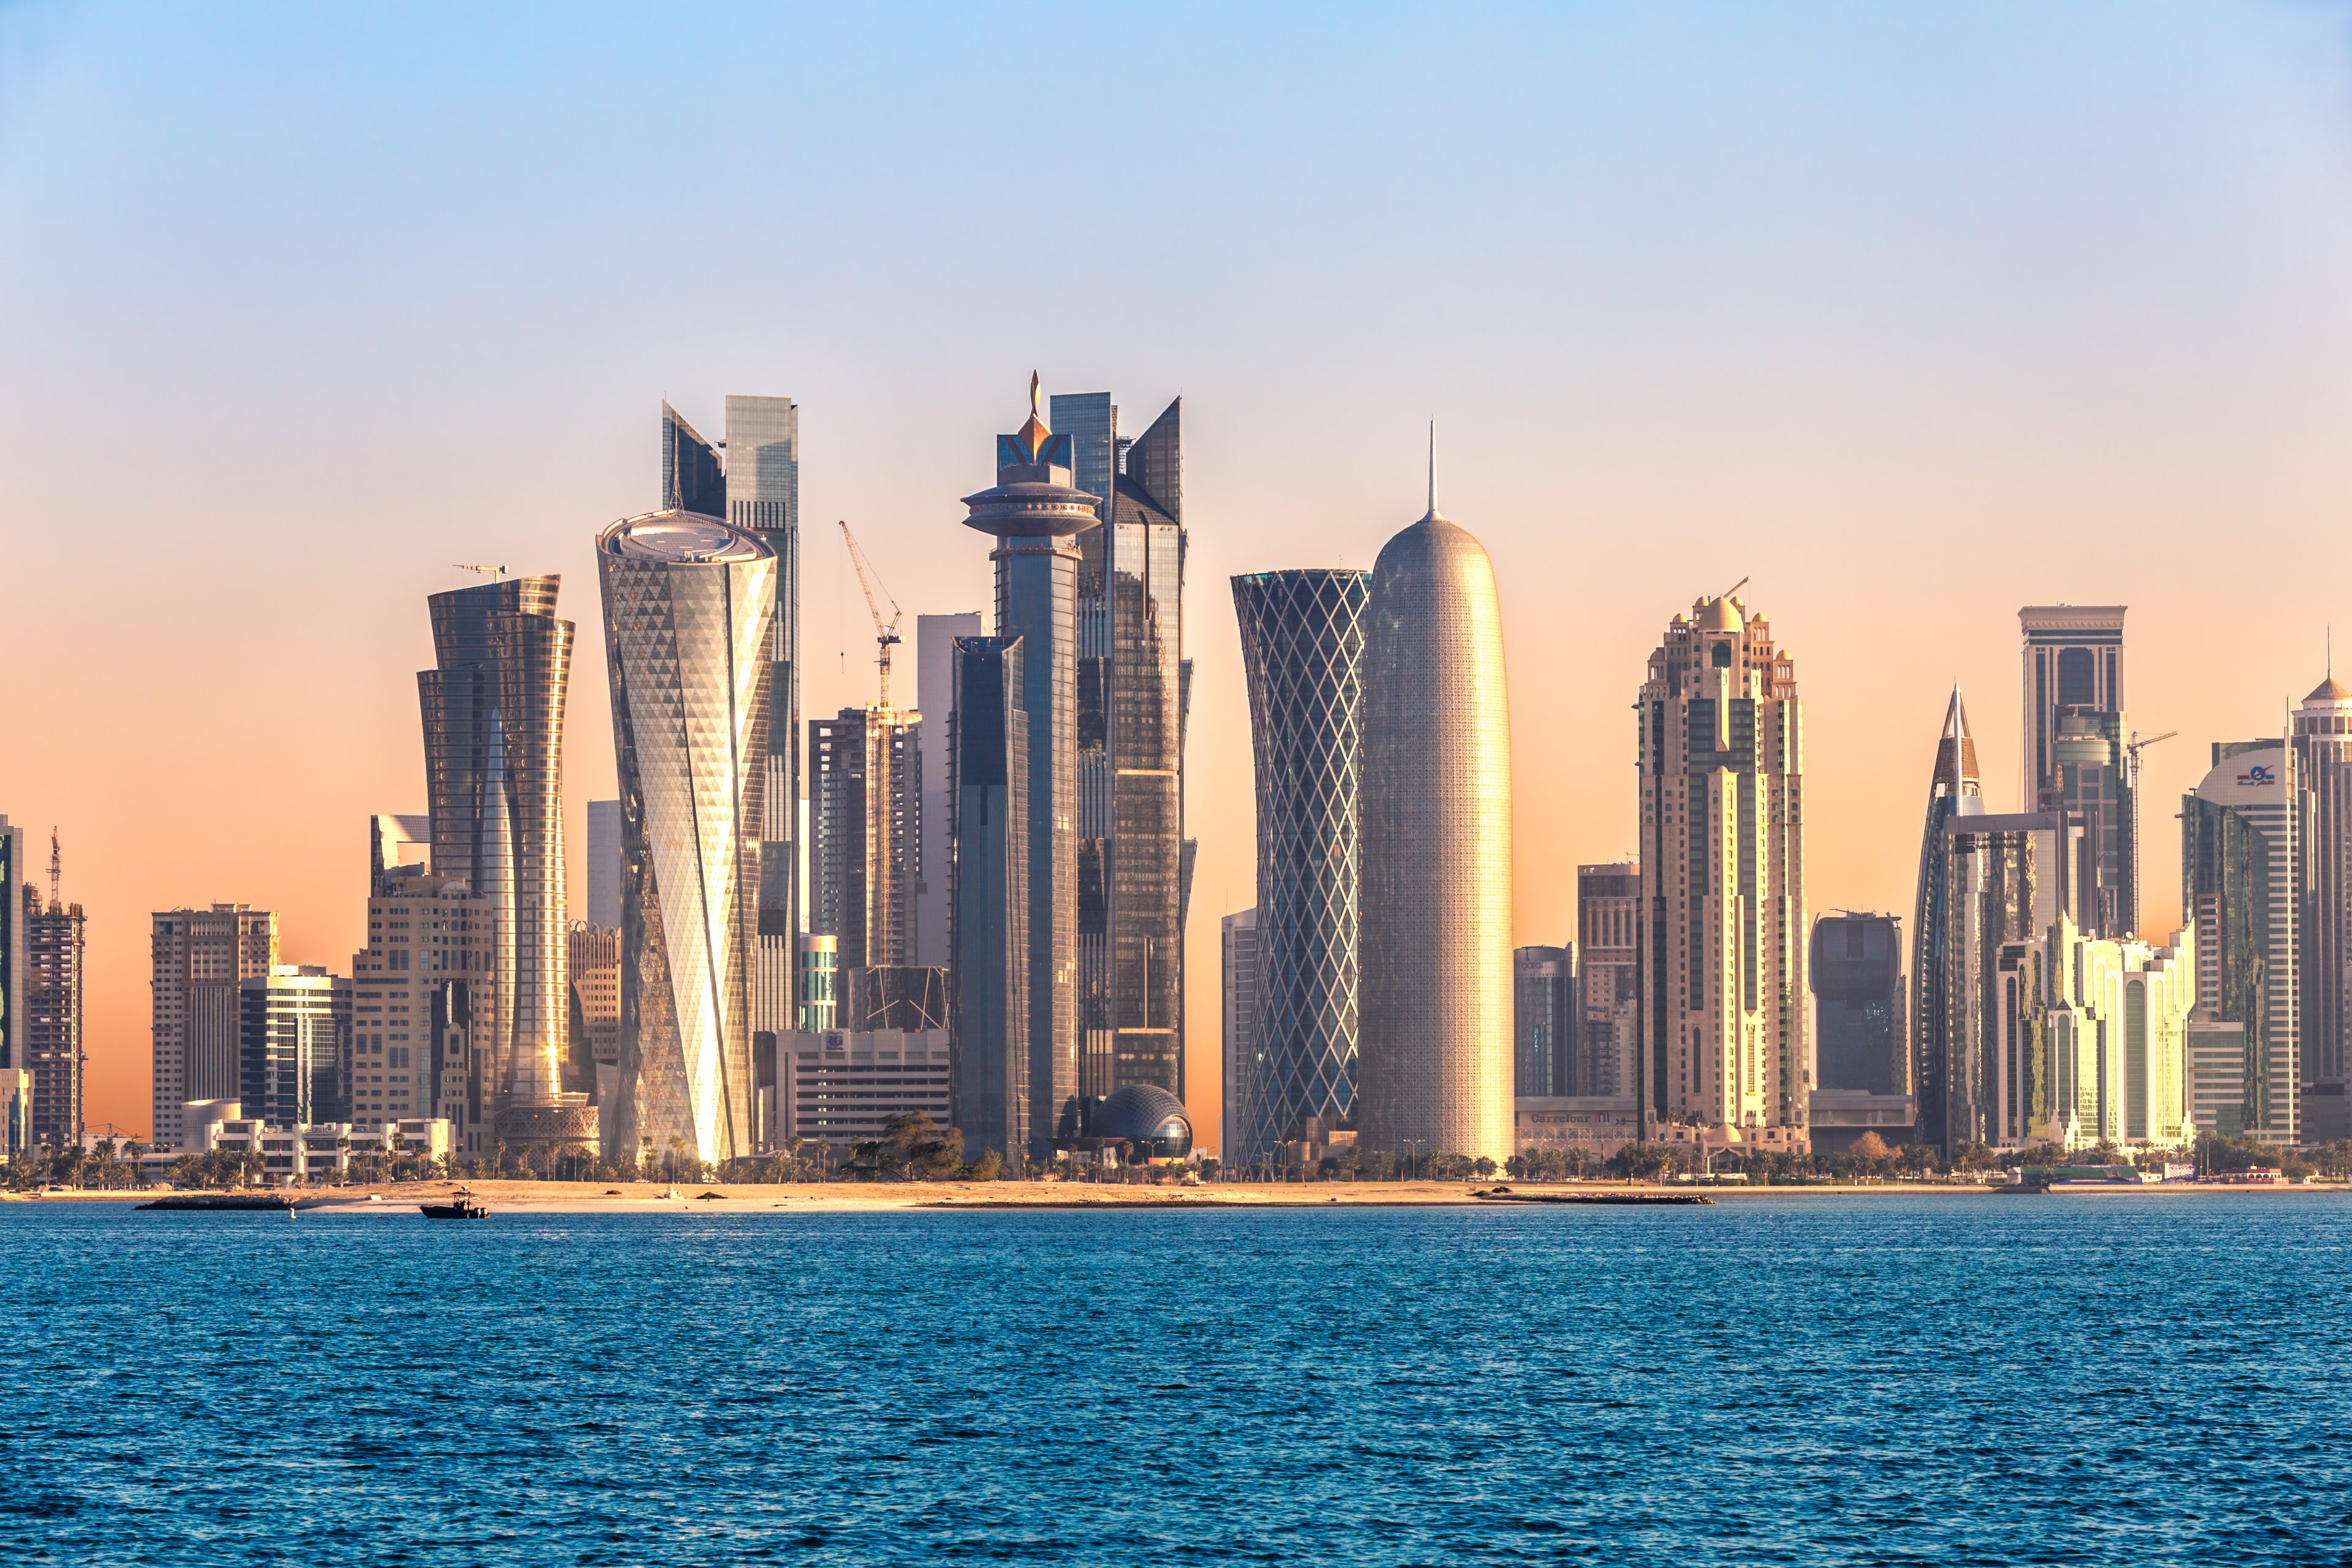 Doha skyline and harbor at sunset, Qatar, Middle East